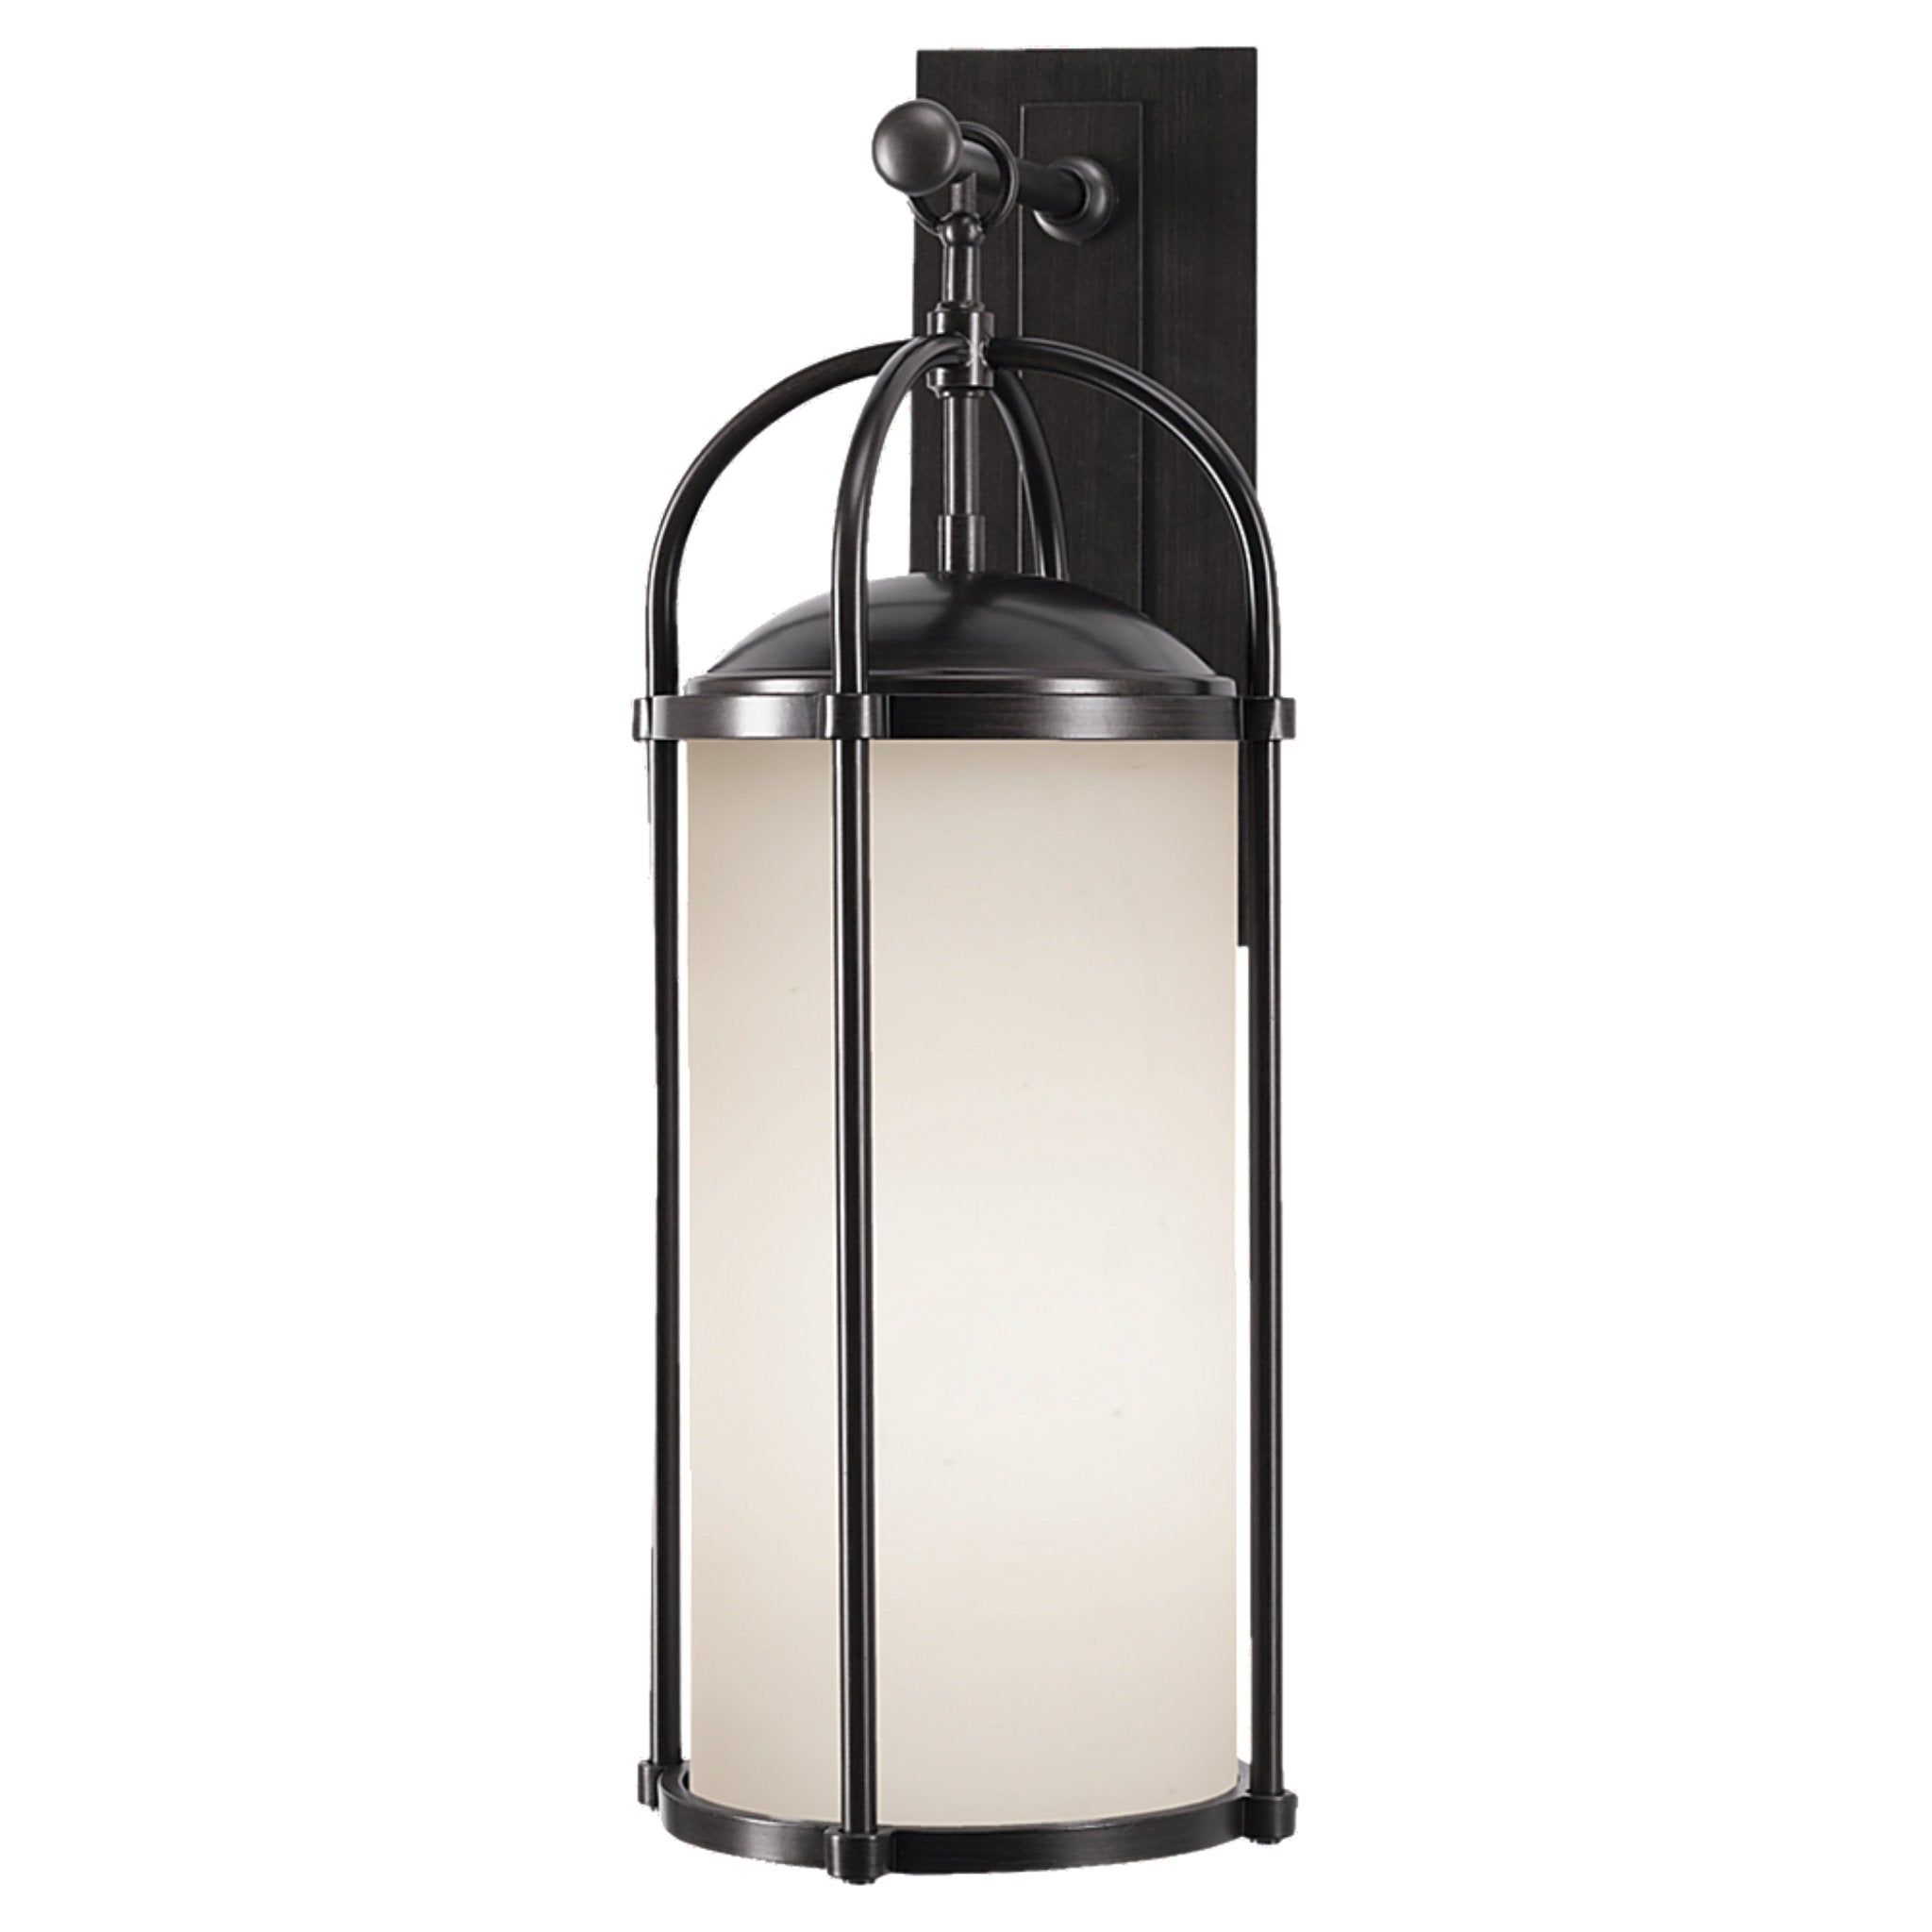 Dakota Large Lantern Transitional Outdoor Fixture 9.5" Width 24.75" Height Aluminum Round White Opal Etched Shade in Espresso